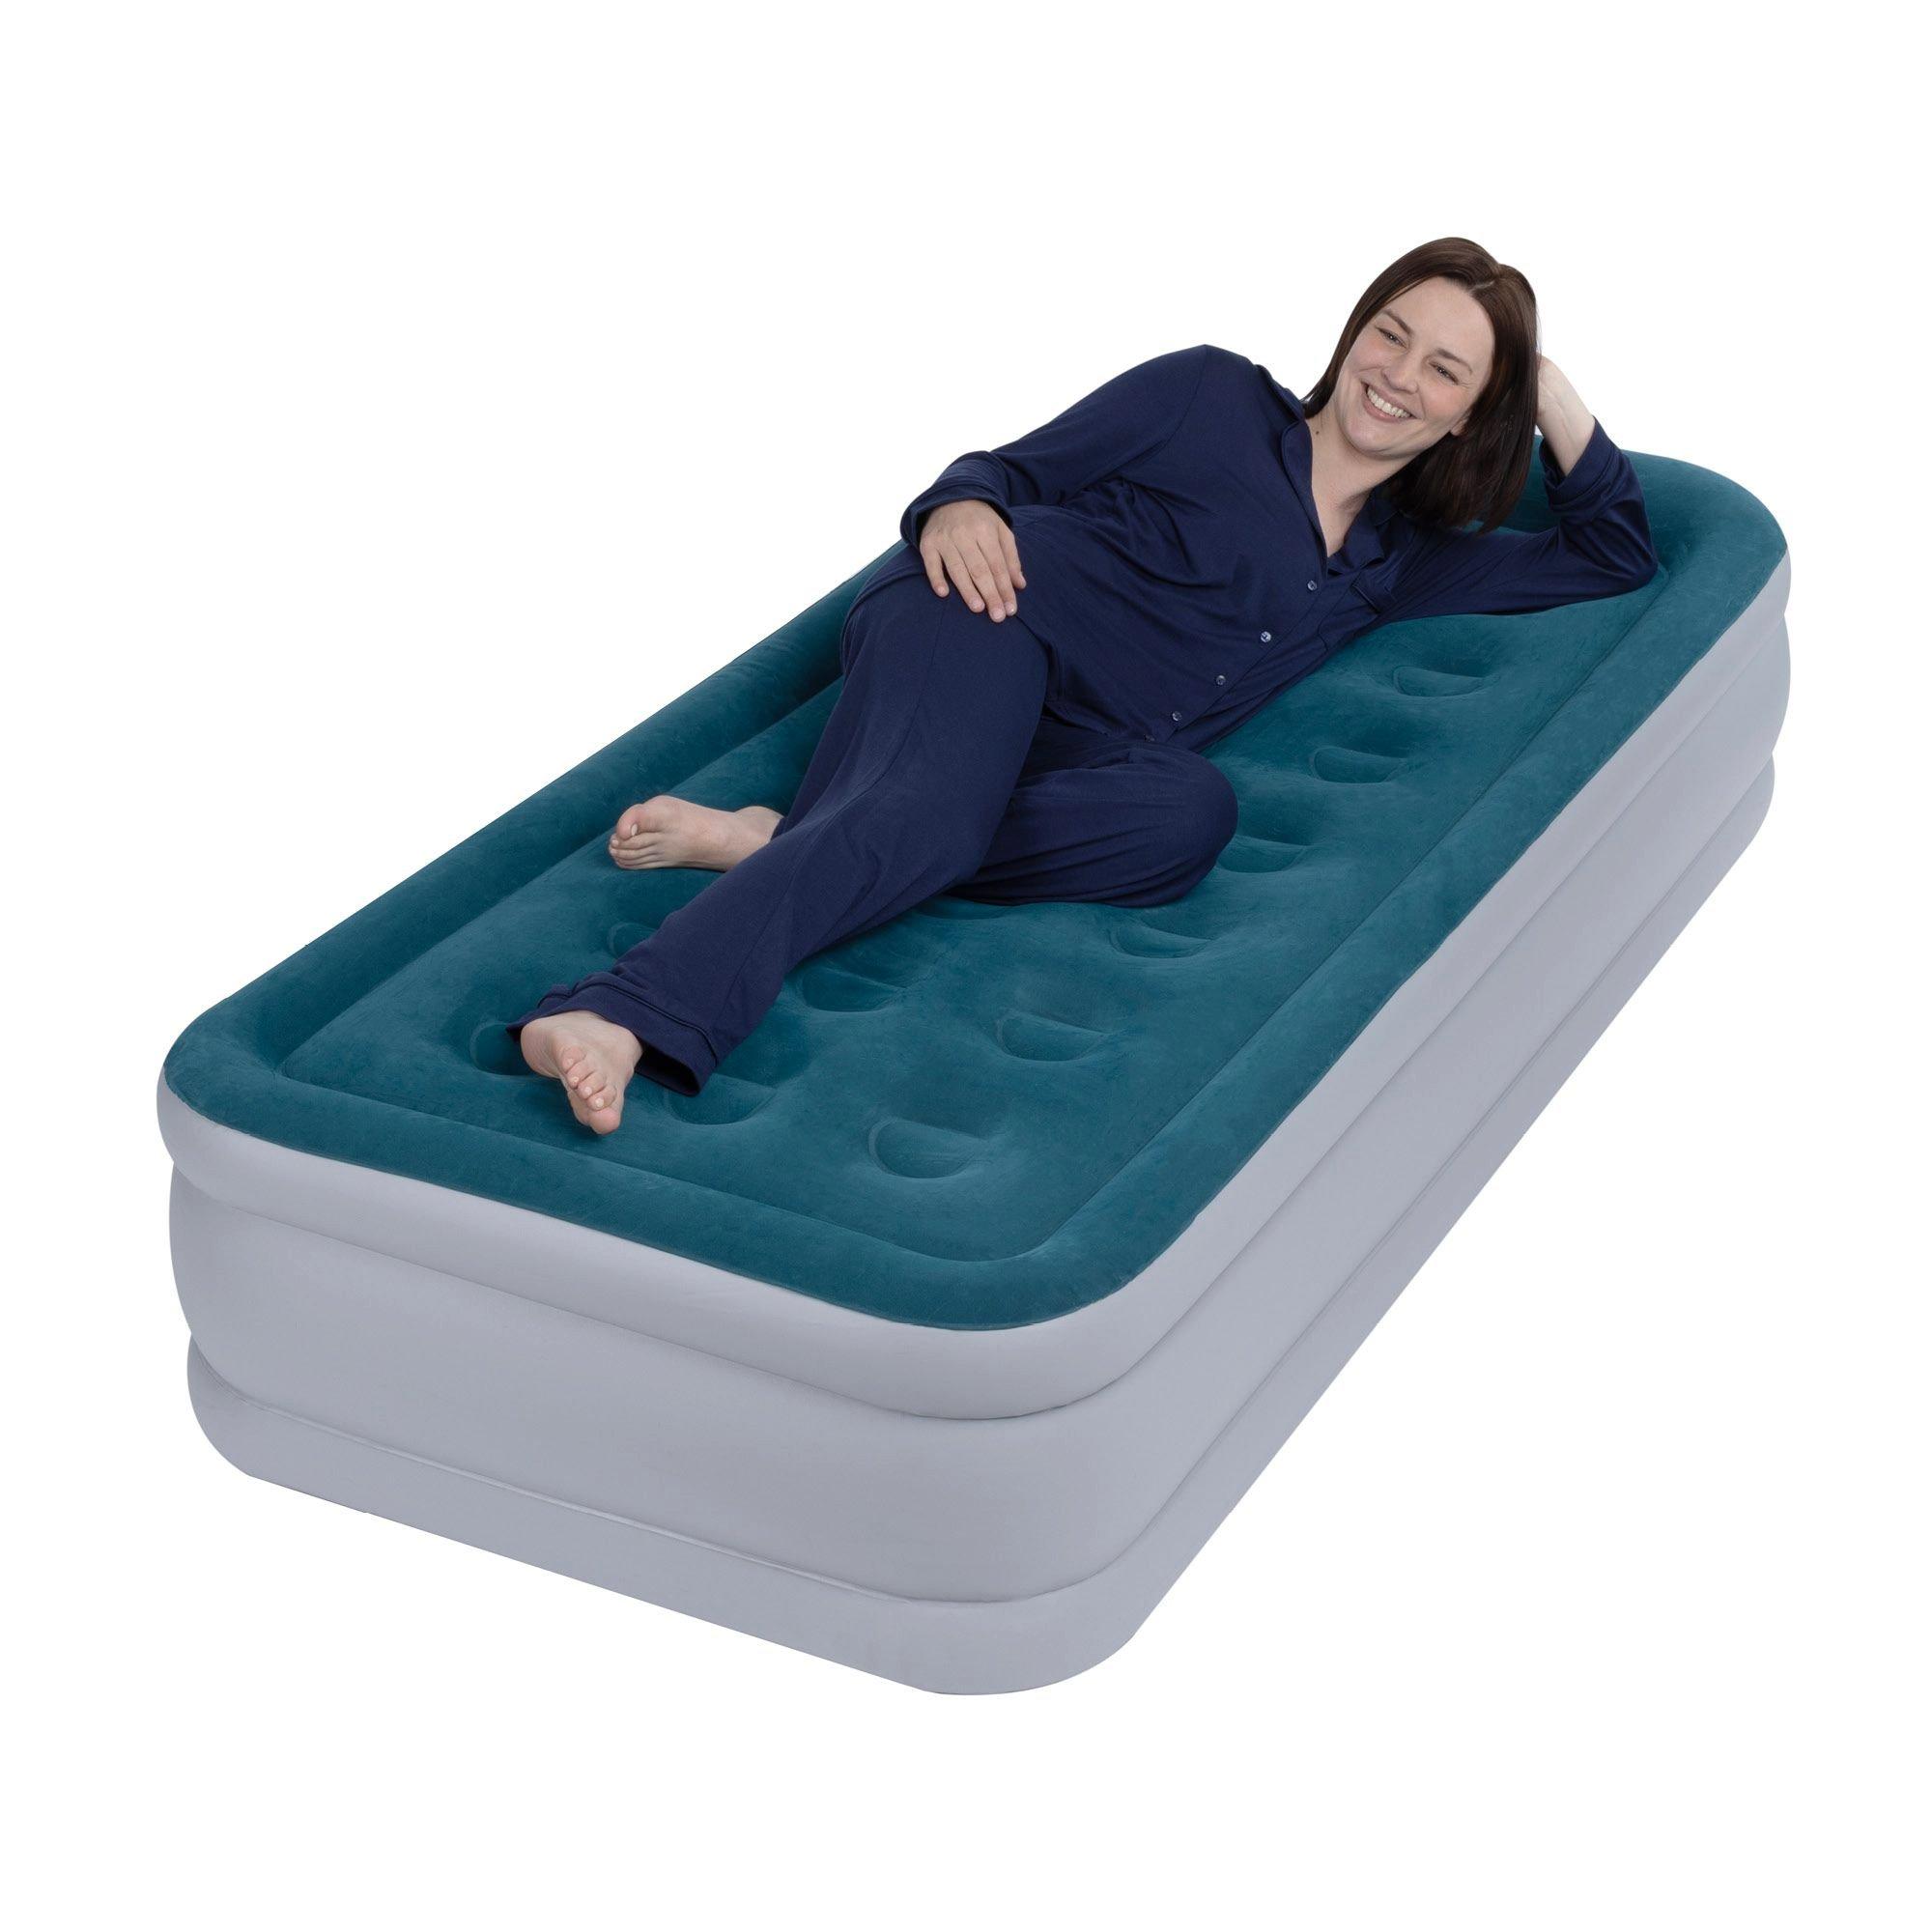 High-Raised Inflatable Air Bed with Built-In Electric Pump